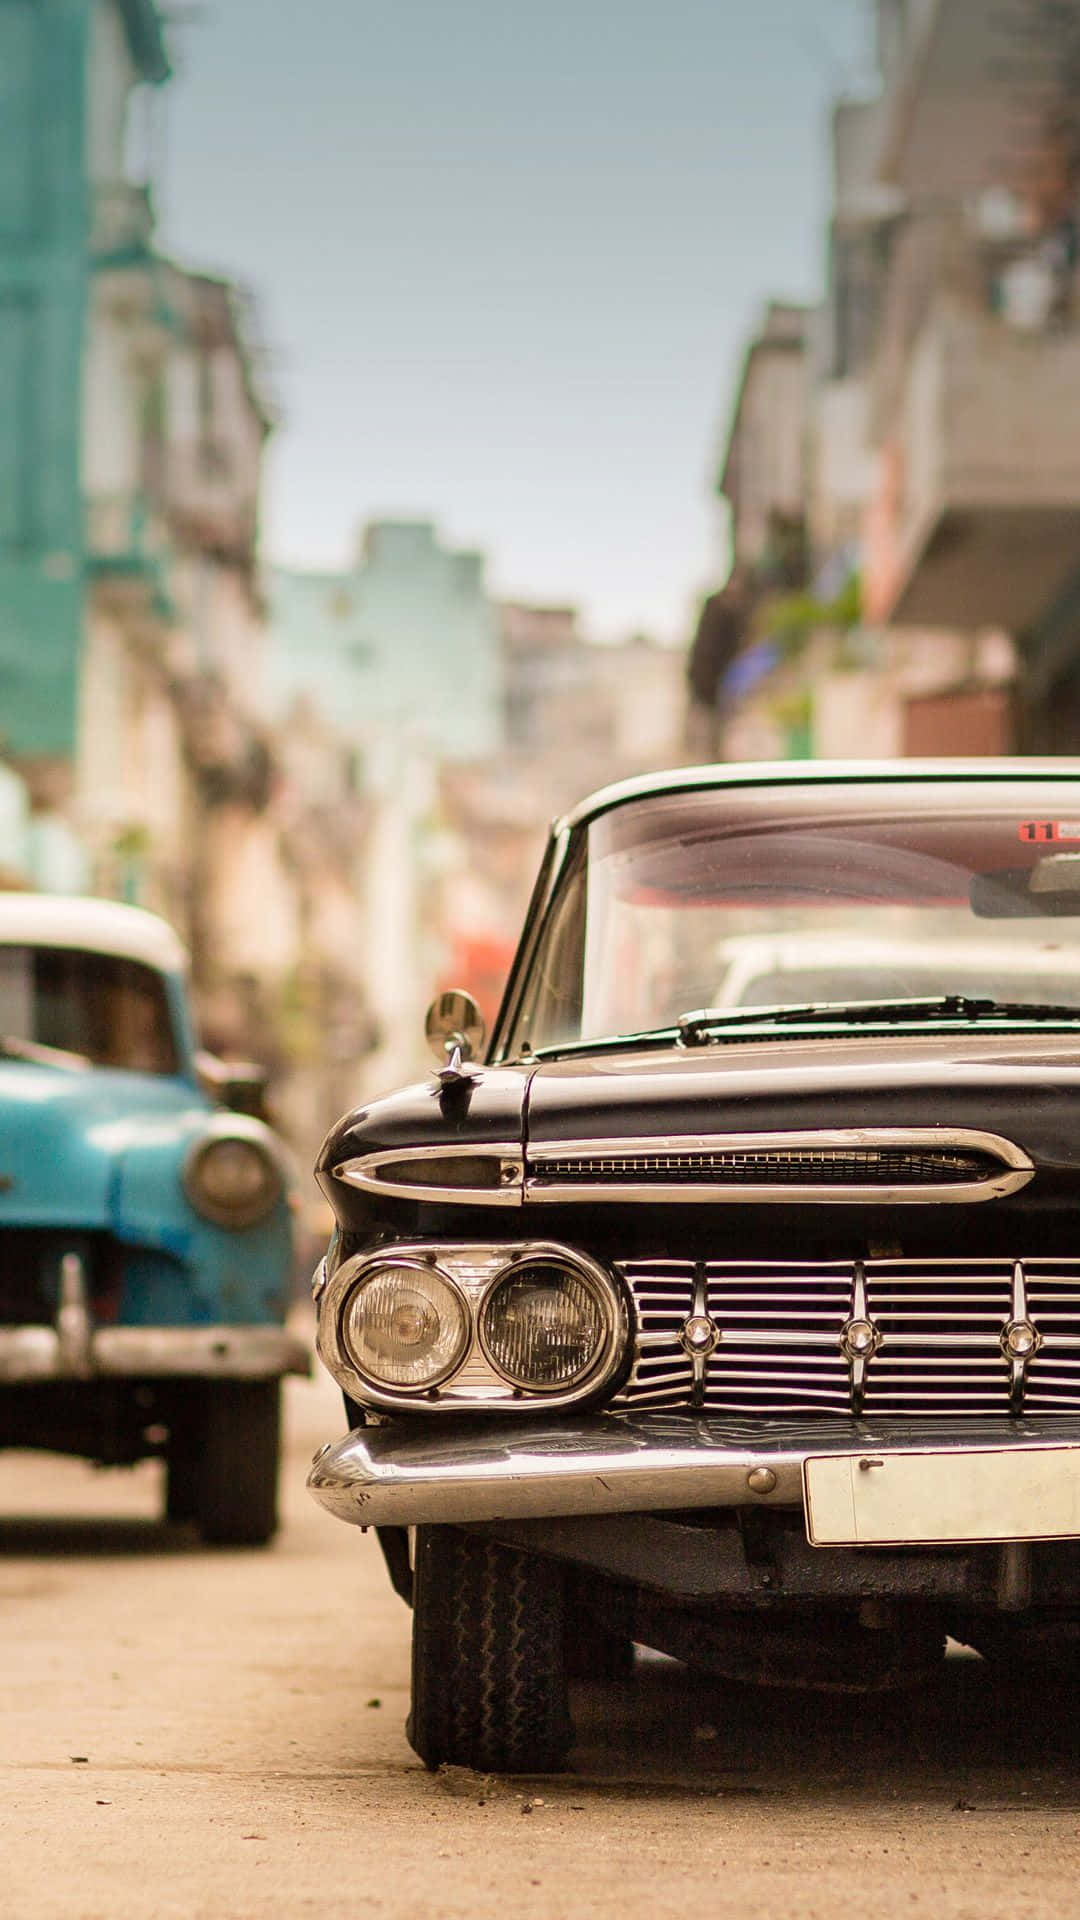 Feel the wind in your hair while driving in a classic car! Wallpaper